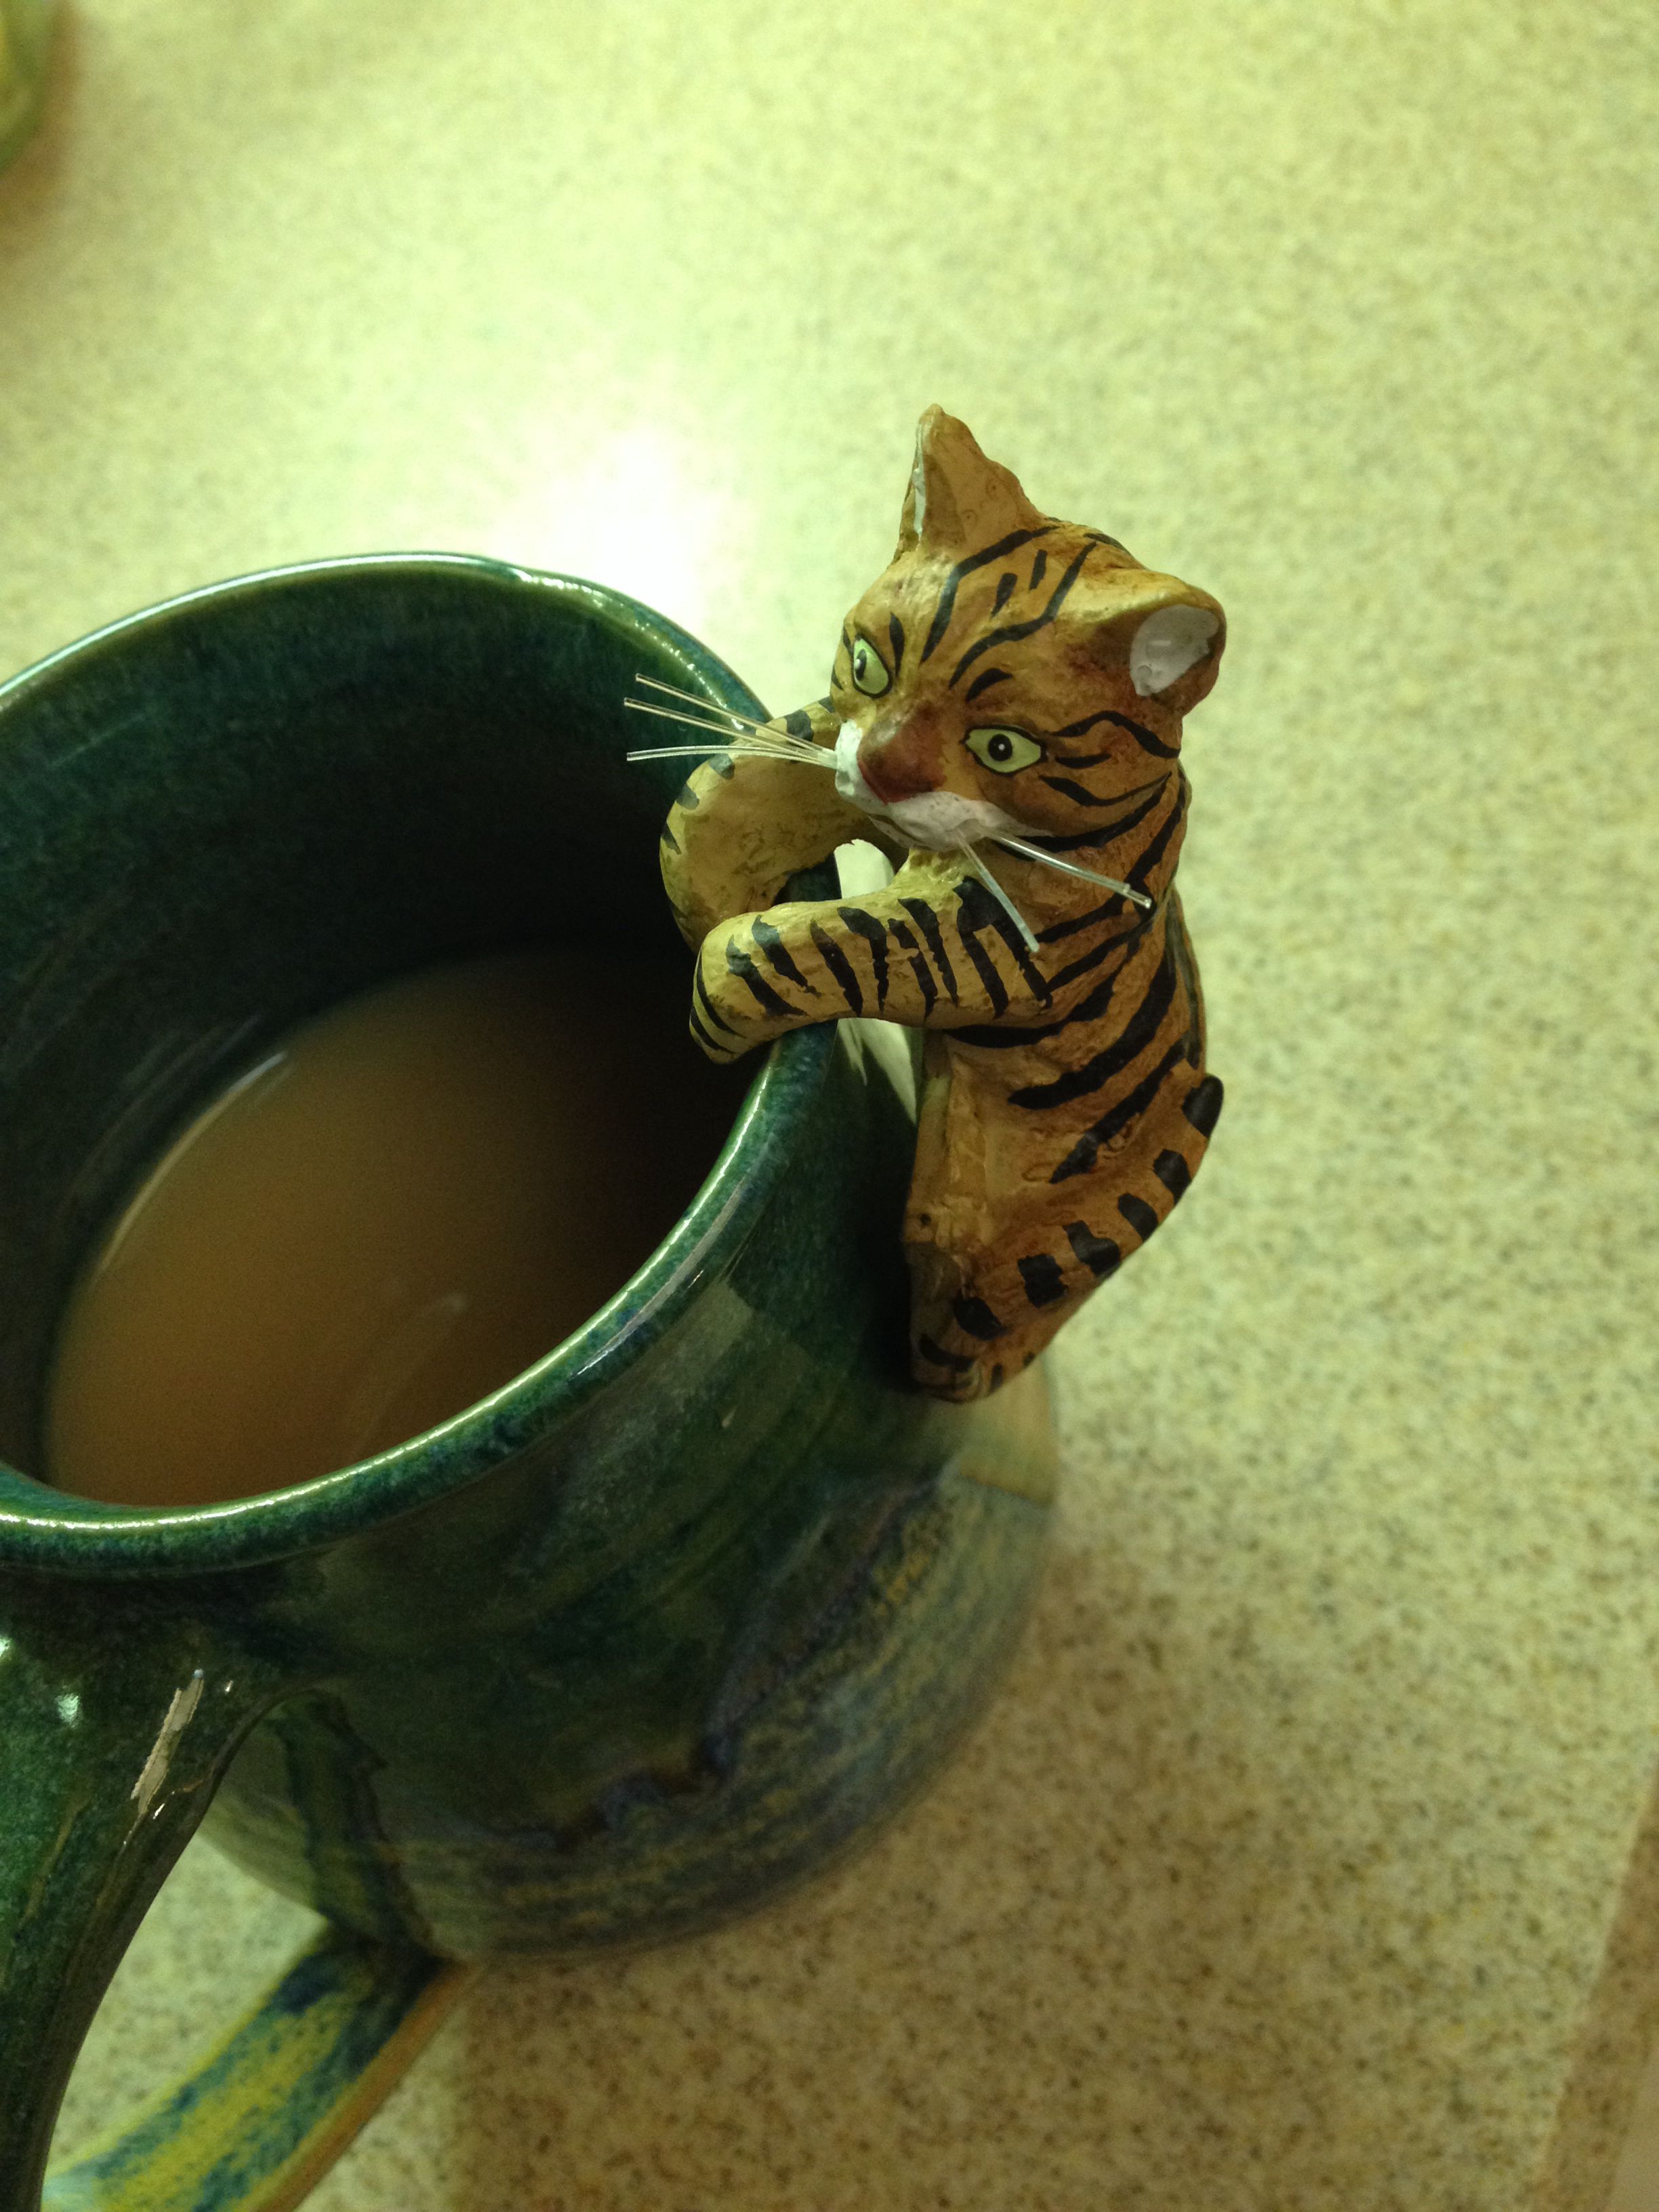 A brown tabby cat pot hugger. It's on my mug, but I will move it to ...